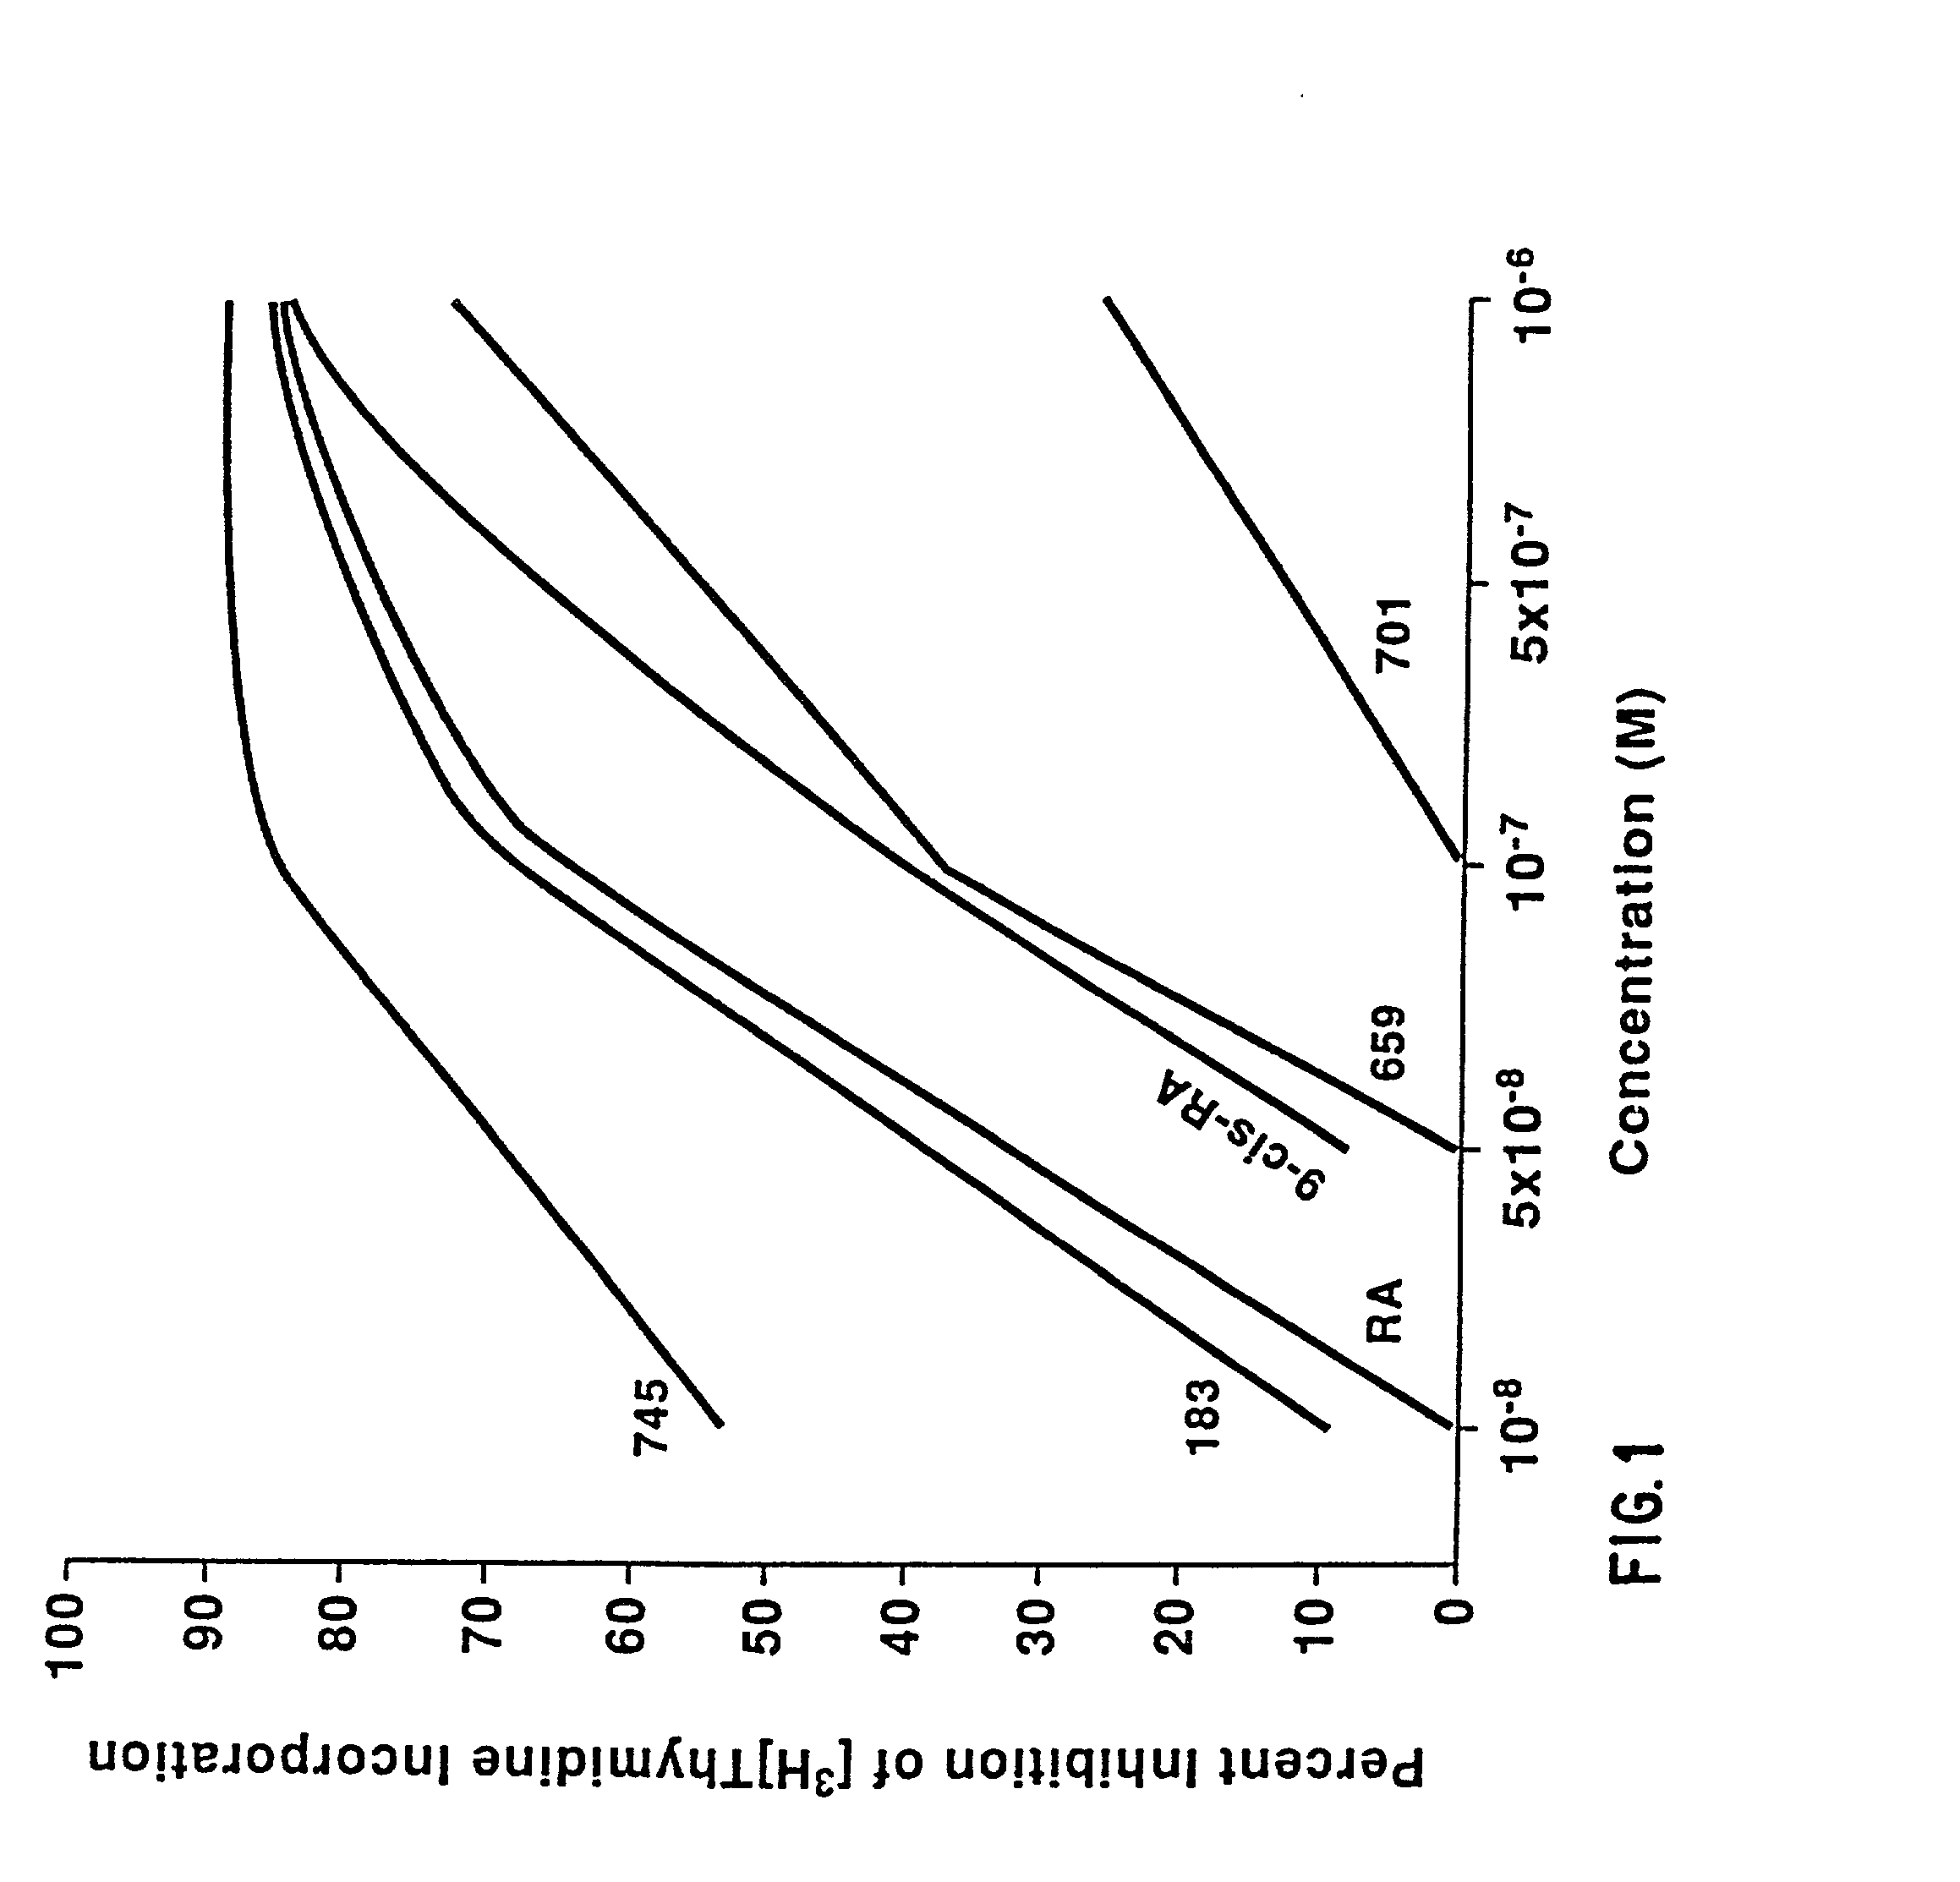 Method of preventing proliferation of retinal pigment epithelium by retinoic acid receptor agonists